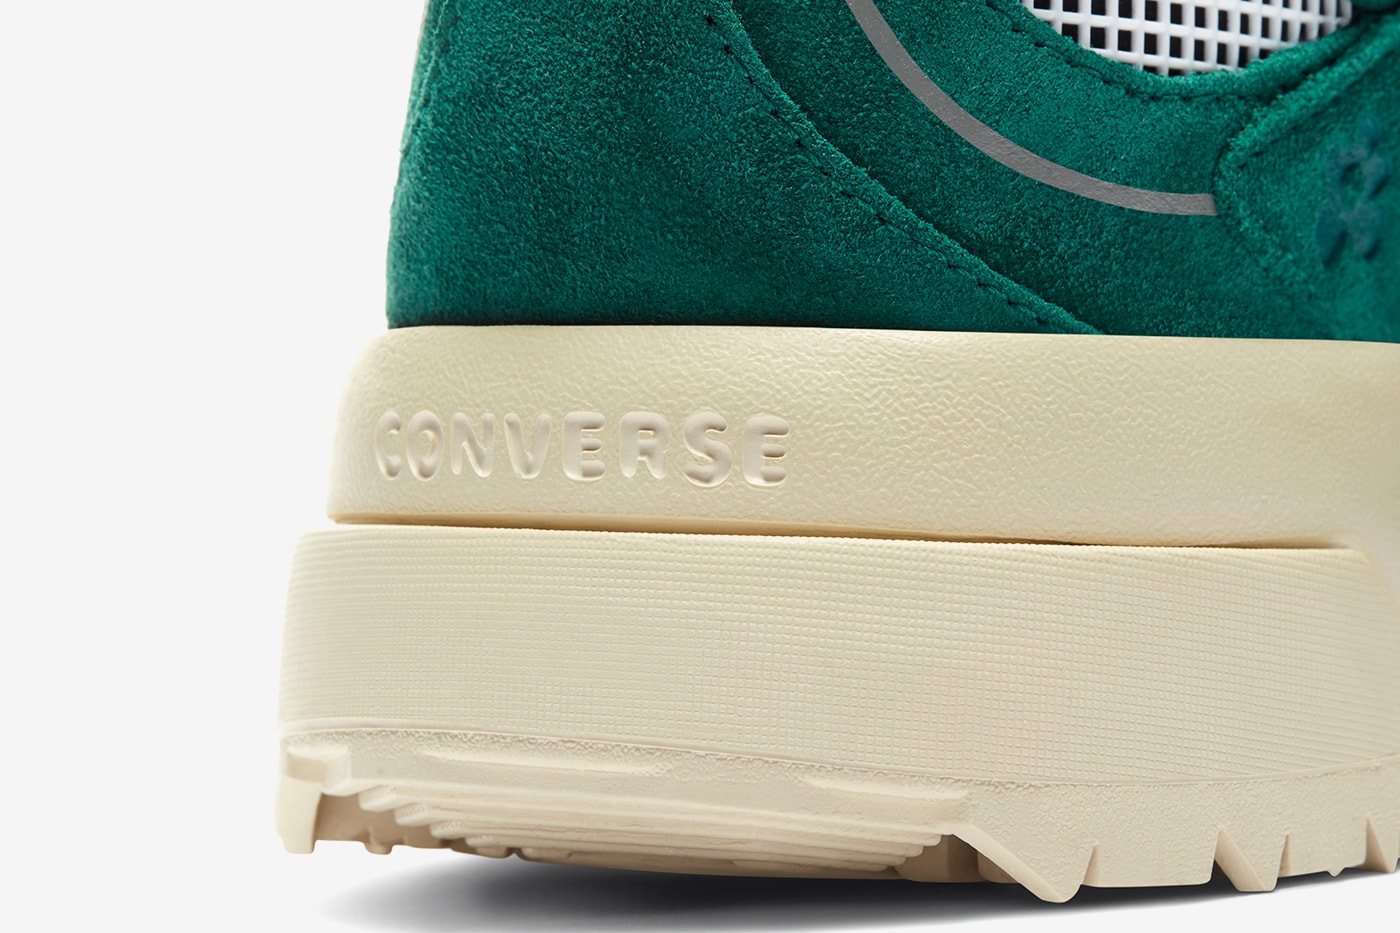 Converse GOLF le FLEUR Gianno Suede menswear streetwear fall winter 2020 collection tyler the creator rapper hip hop artist collaboration shoes footwear sneakers trainers trail runners